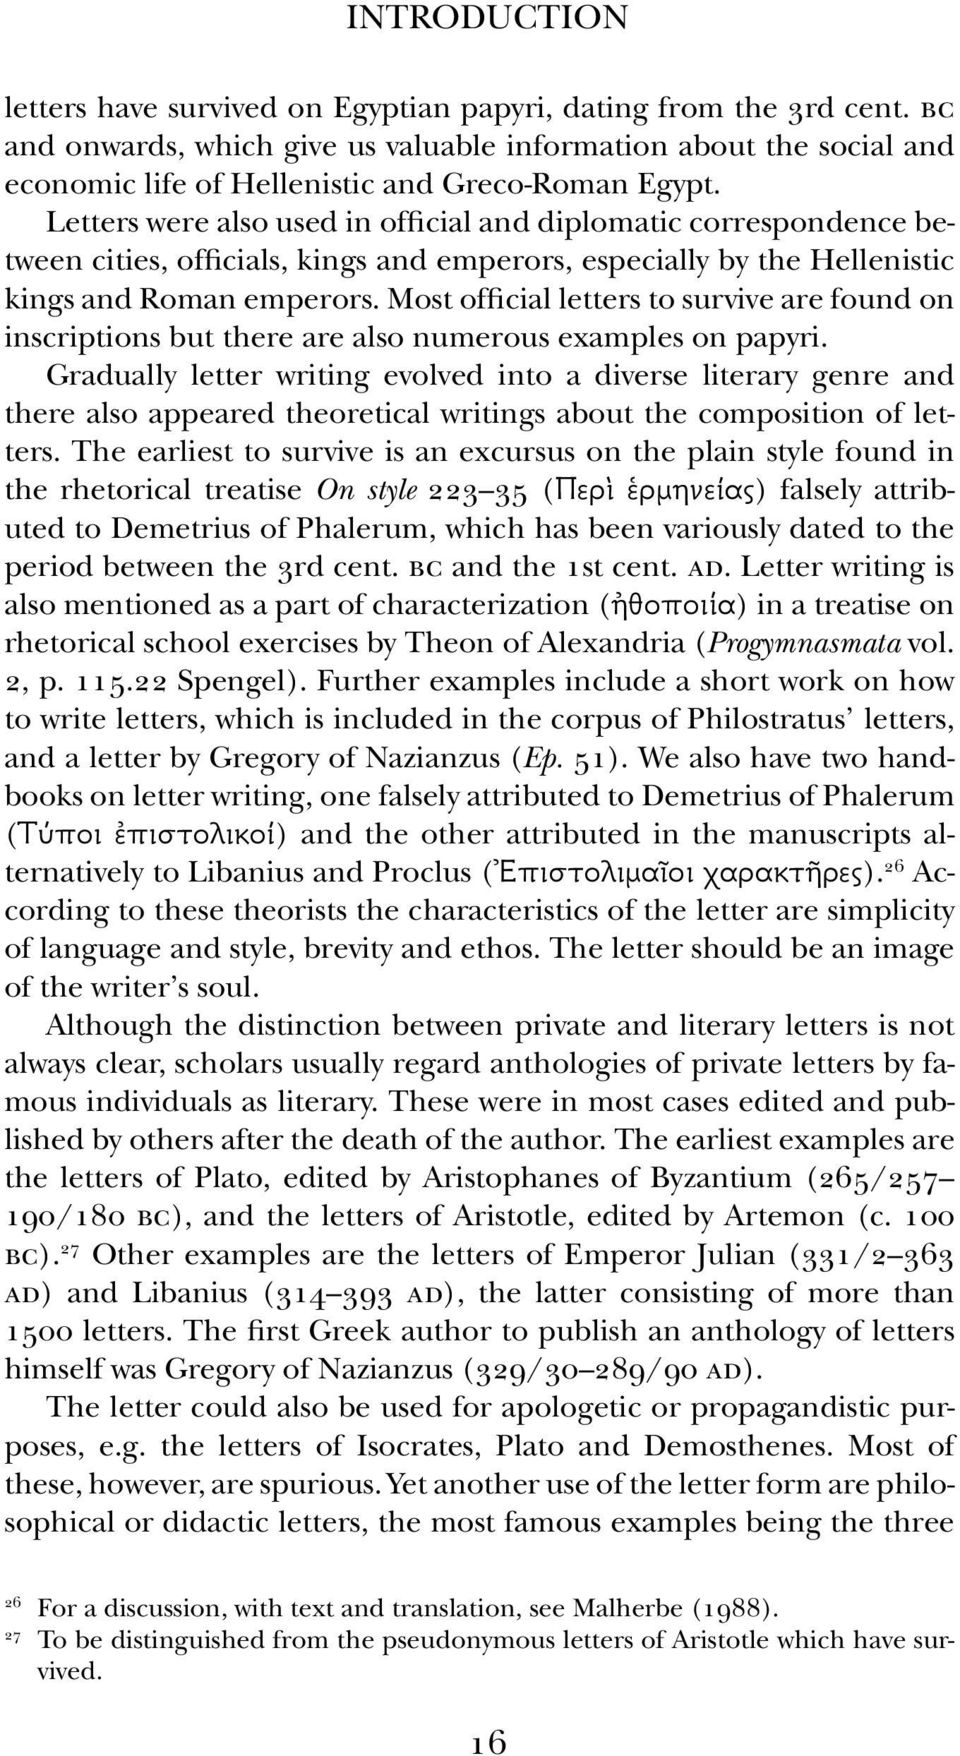 letters were also used in official and diplomatic correspondence between cities, officials, kings and emperors, especially by the hellenistic kings and roman emperors.